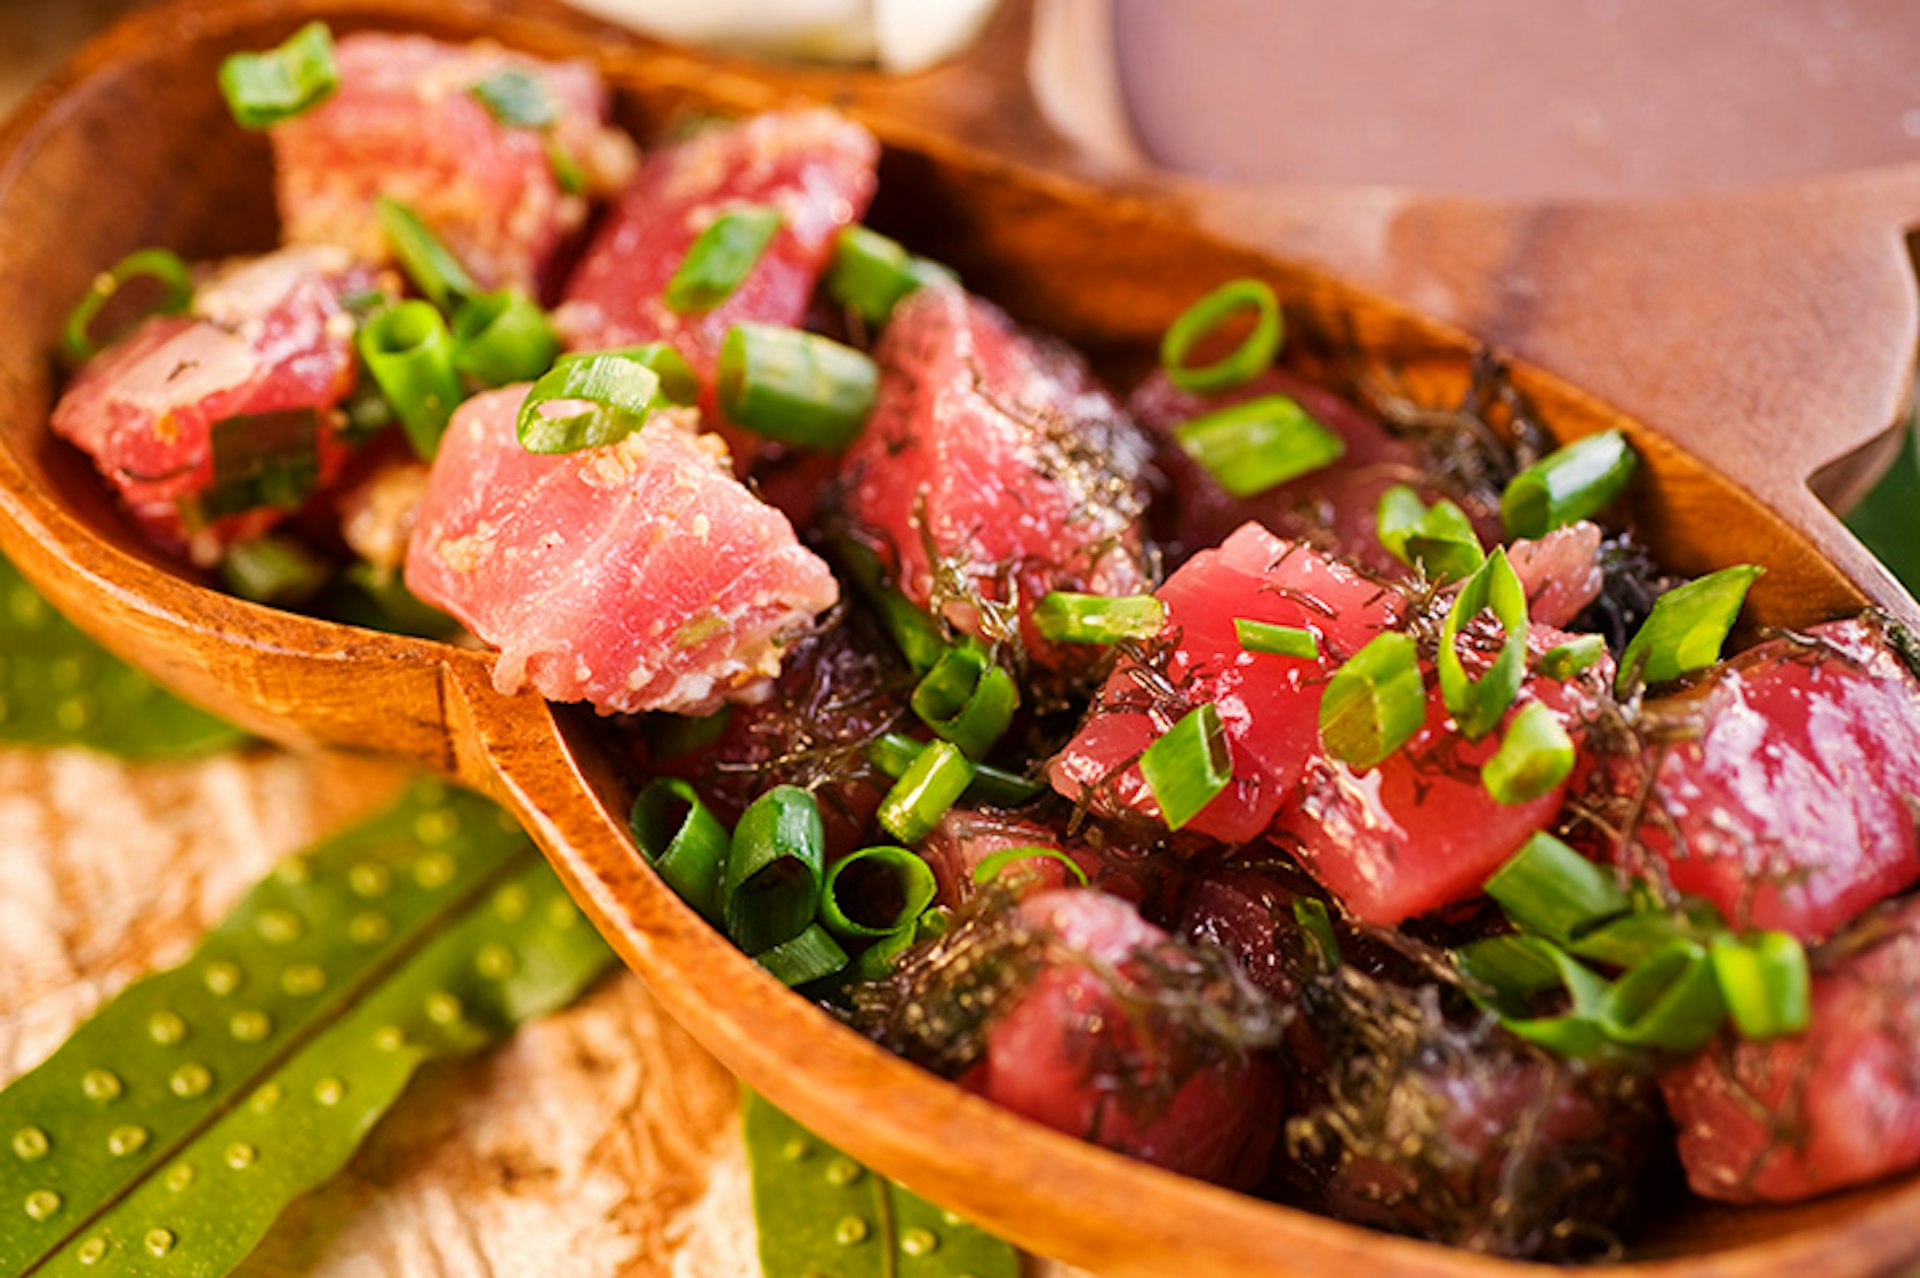 Poke with macadamia nuts and seaweed. Image by Ann Cecil/Getty Images.